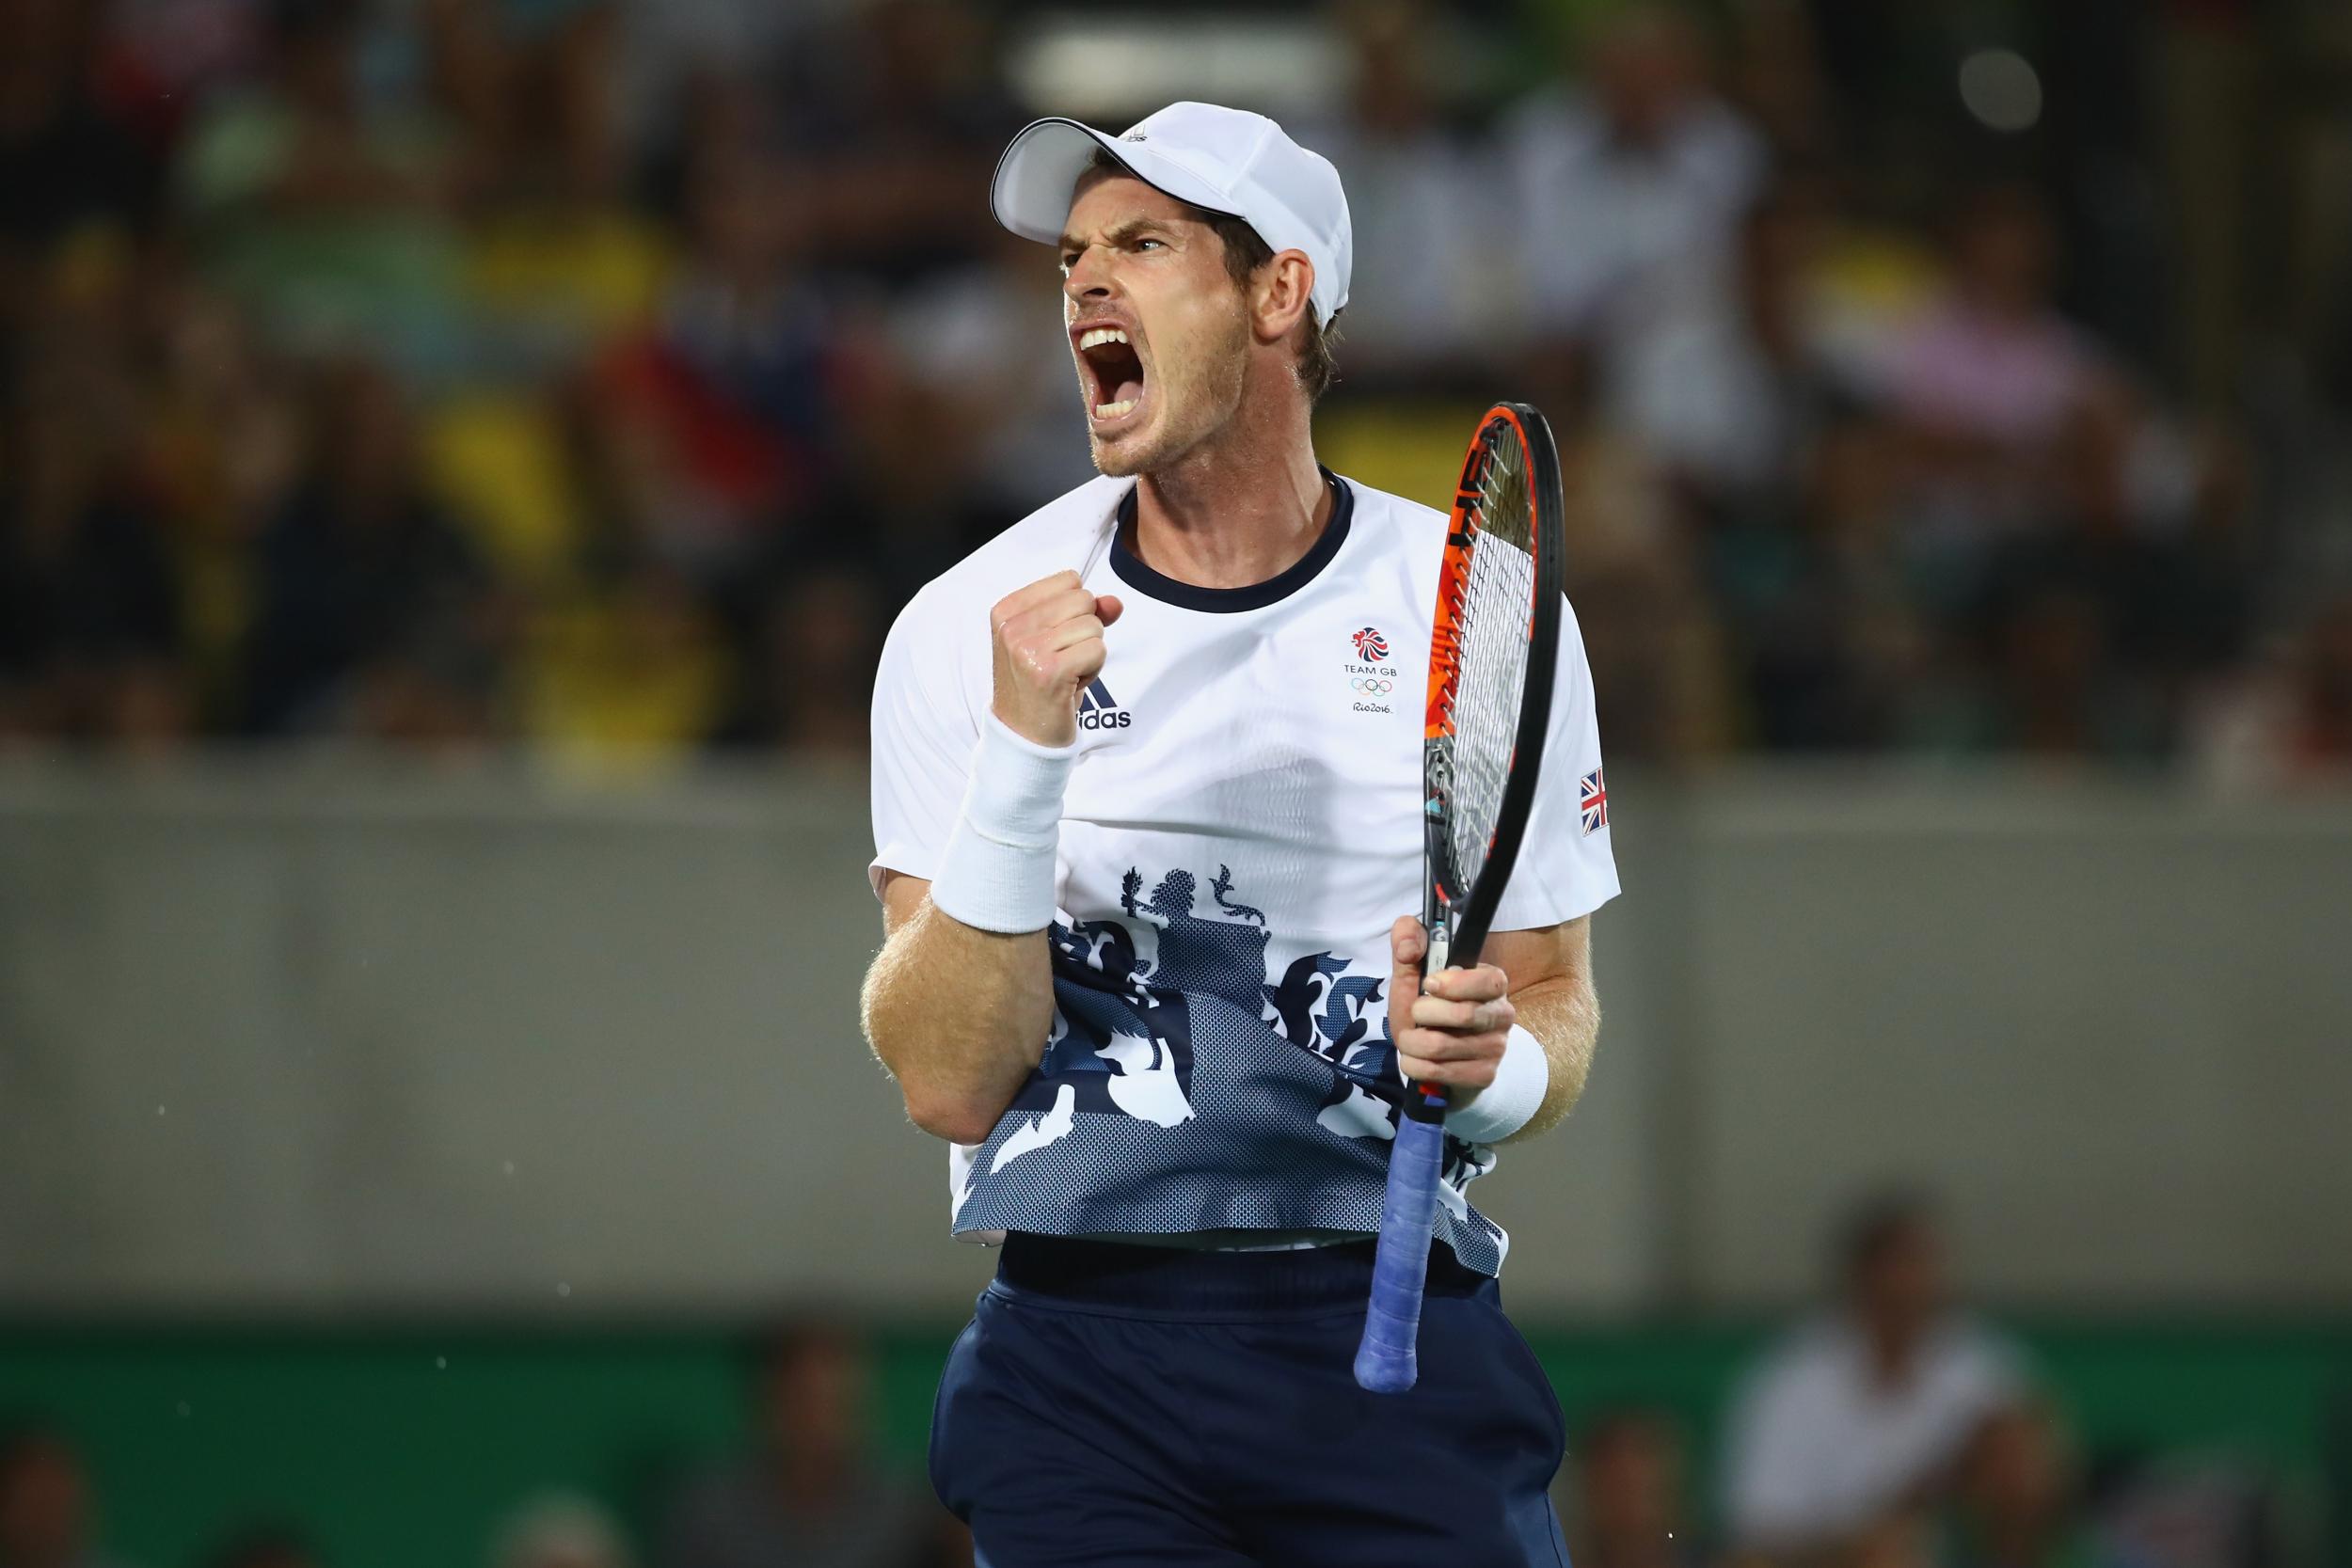 Andy Murray fought tooth and nail for his second Olympic gold